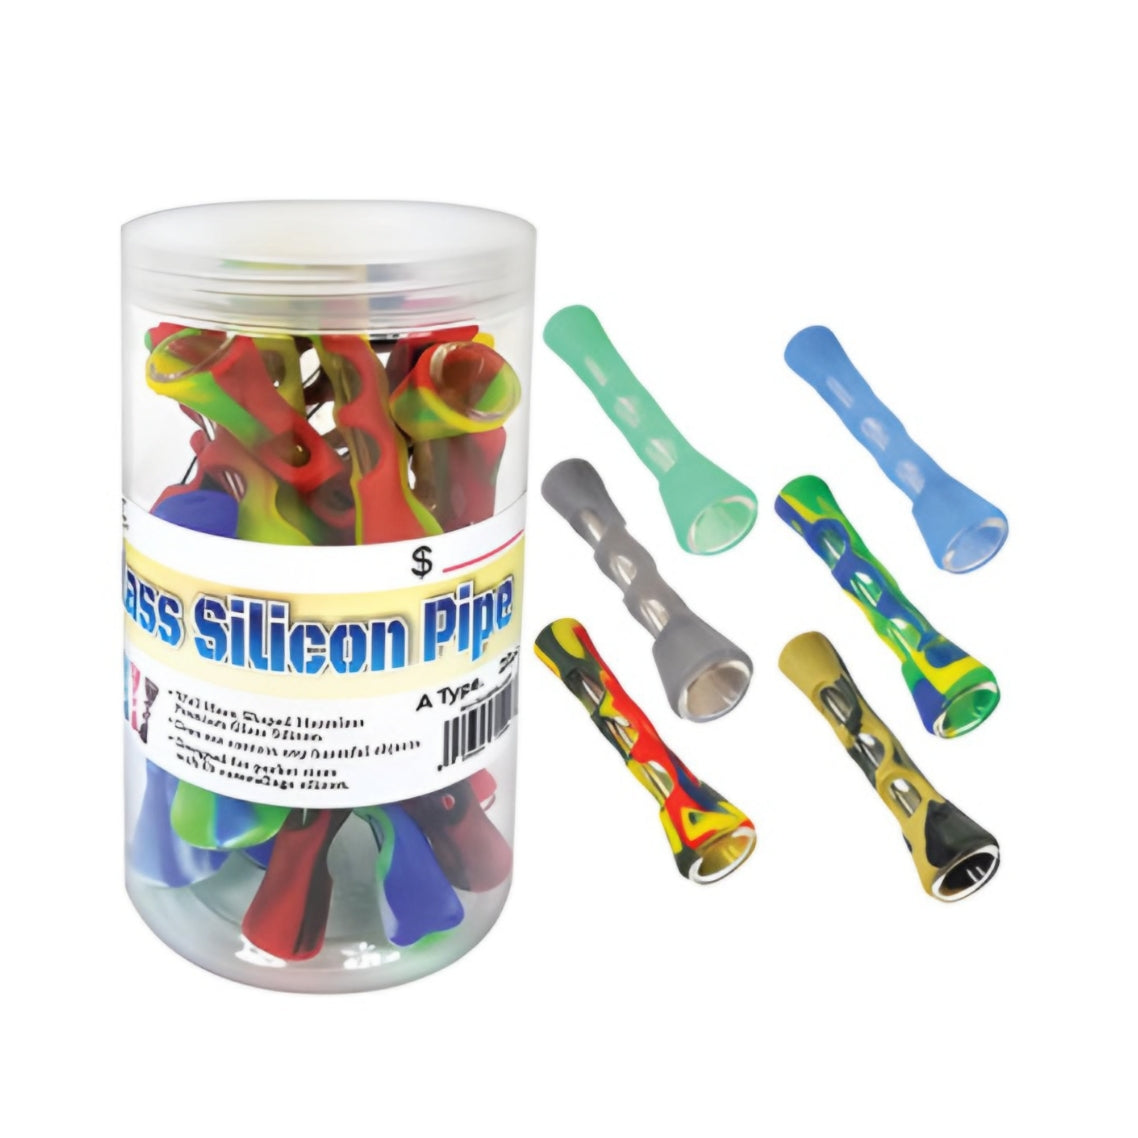 Silicone Pipe Jar 20ct | Item No.: N/A